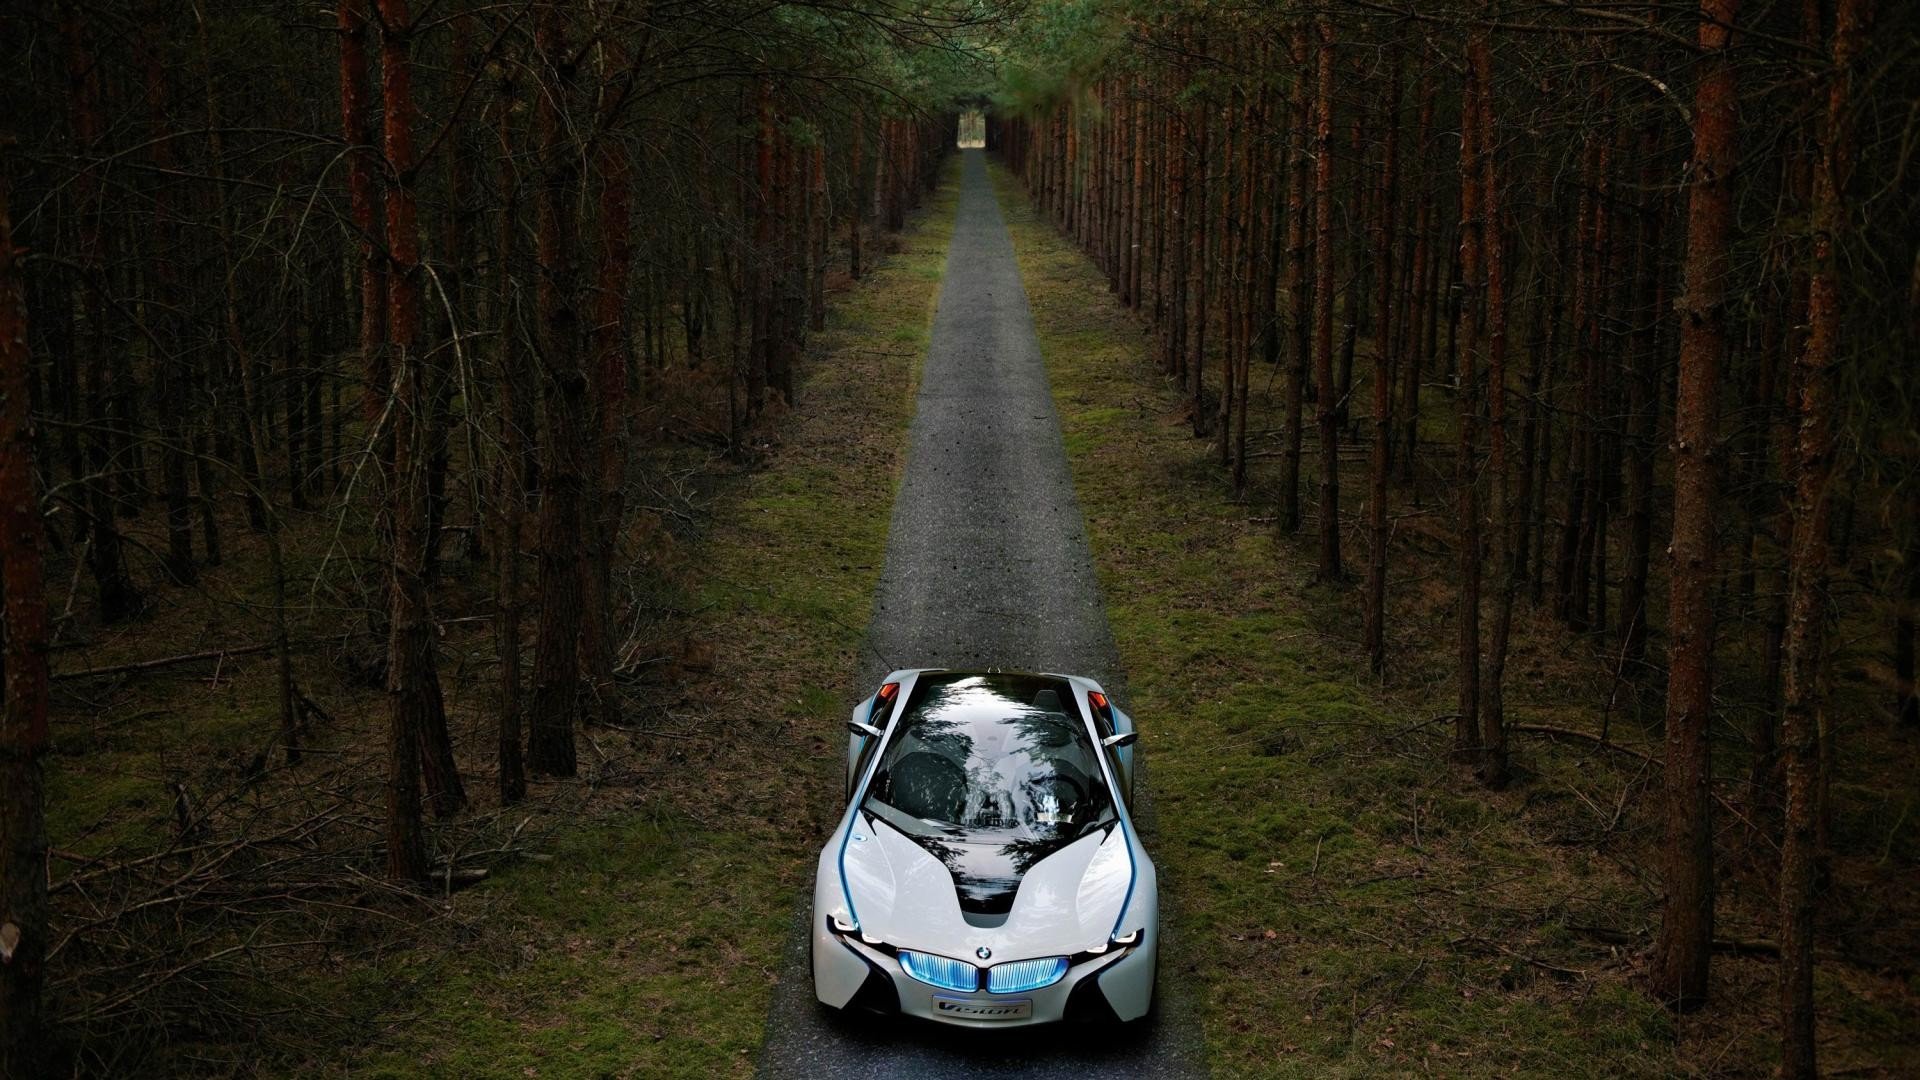 bmw, Forests, Roads, Bmw, Vision Wallpaper